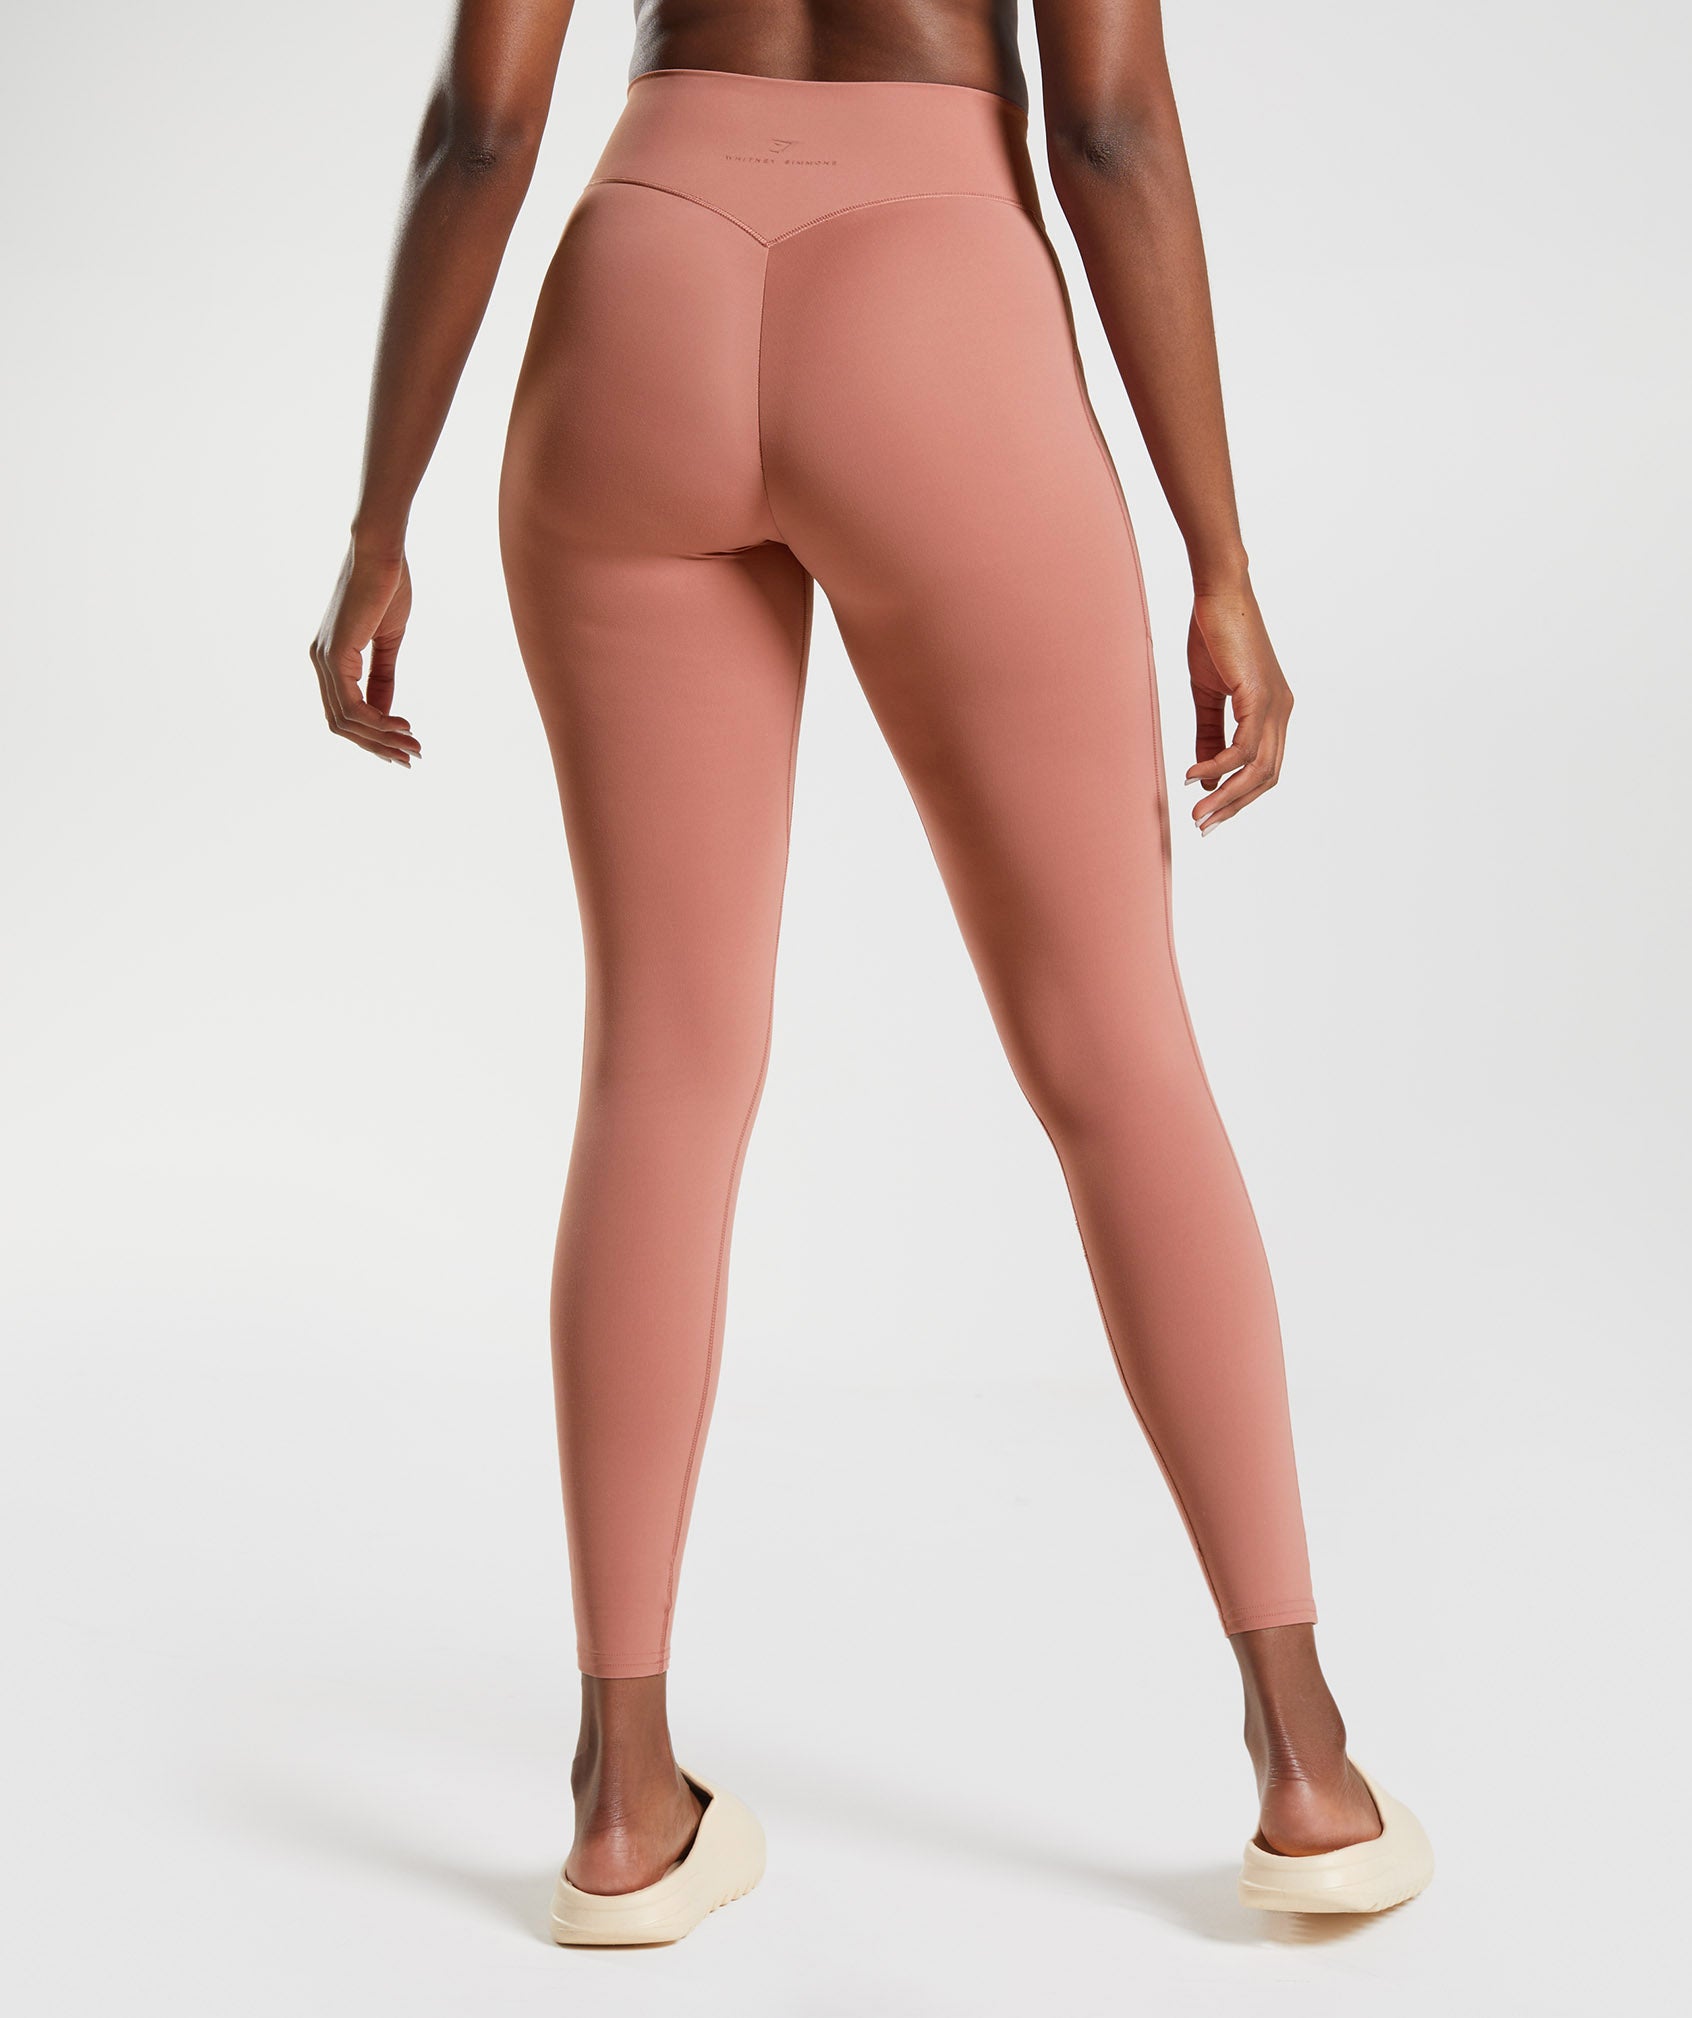 Gymshark Dreamy Leggings Red Size XS - $40 (33% Off Retail) - From Angelina